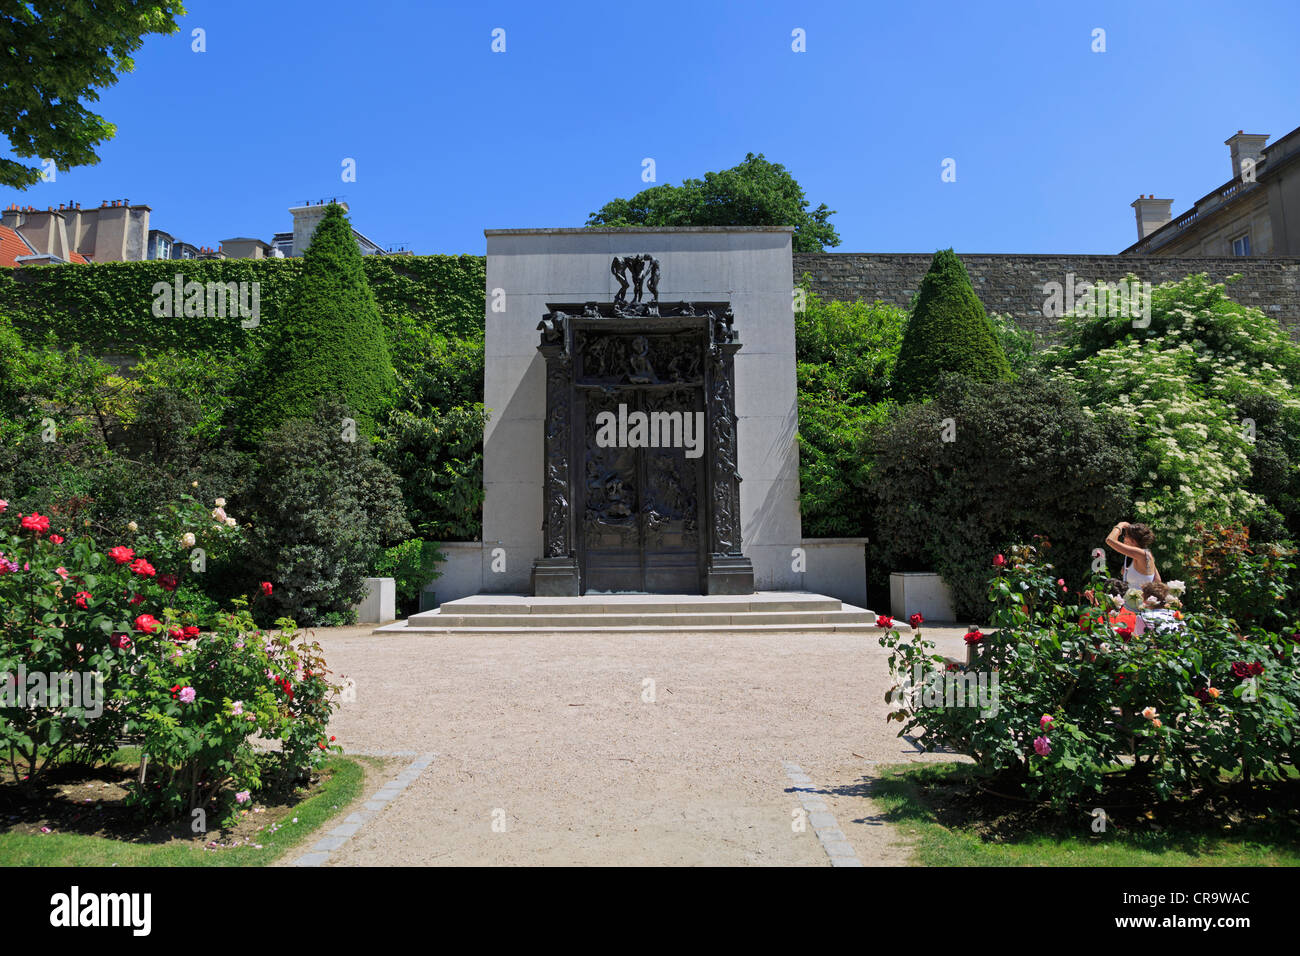 Gardens of the Rodin Museum in Paris. The sculpture The Gates of Hell is set amid rose bushes in the garden of the musuem. Stock Photo